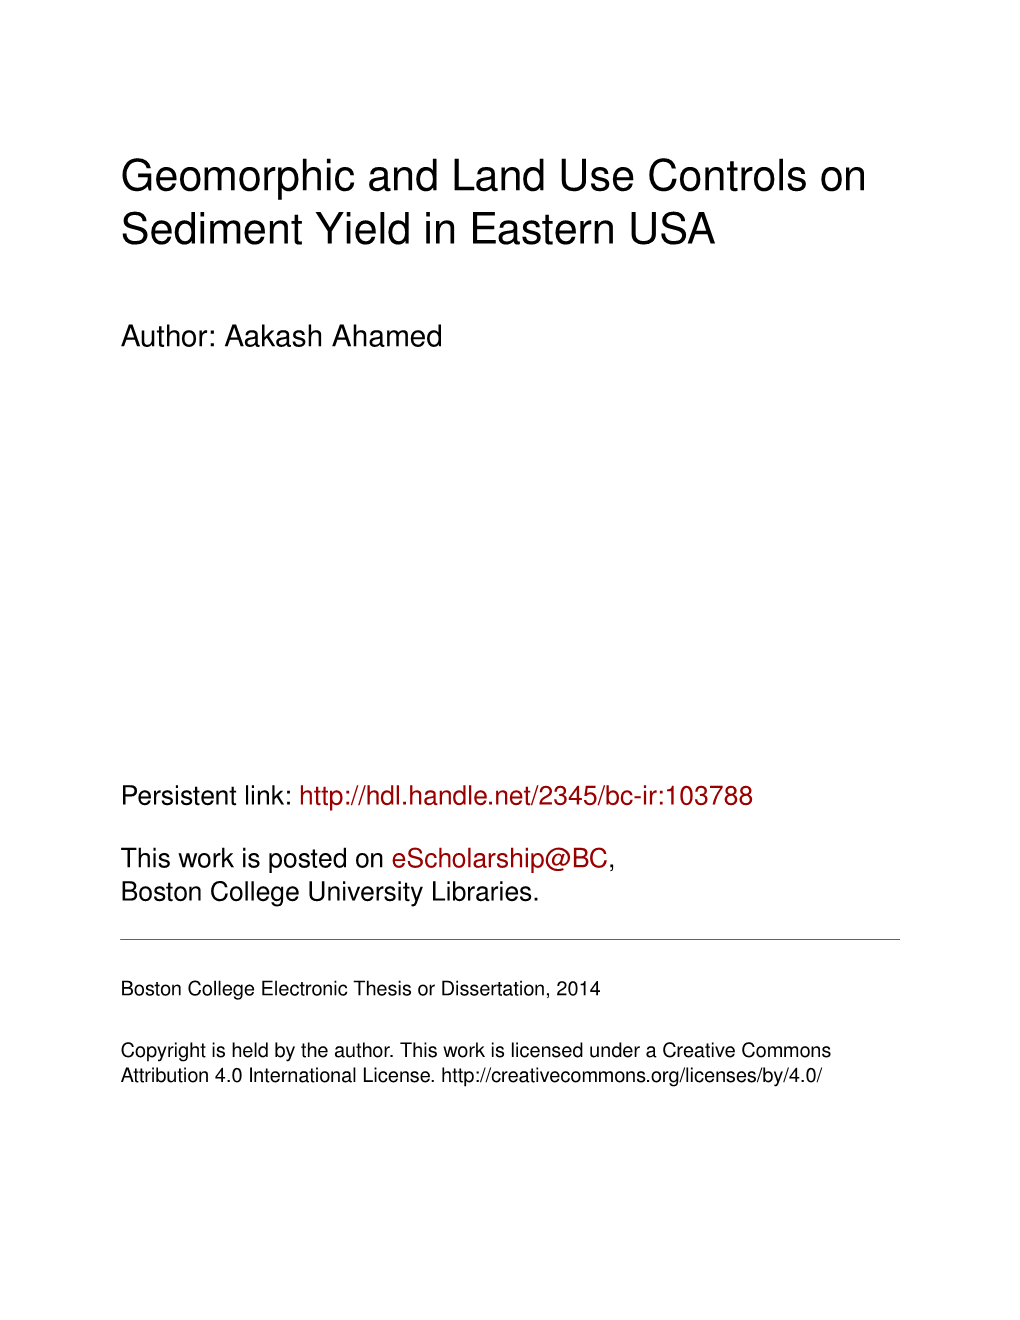 Geomorphic and Land Use Controls on Sediment Yield in Eastern USA